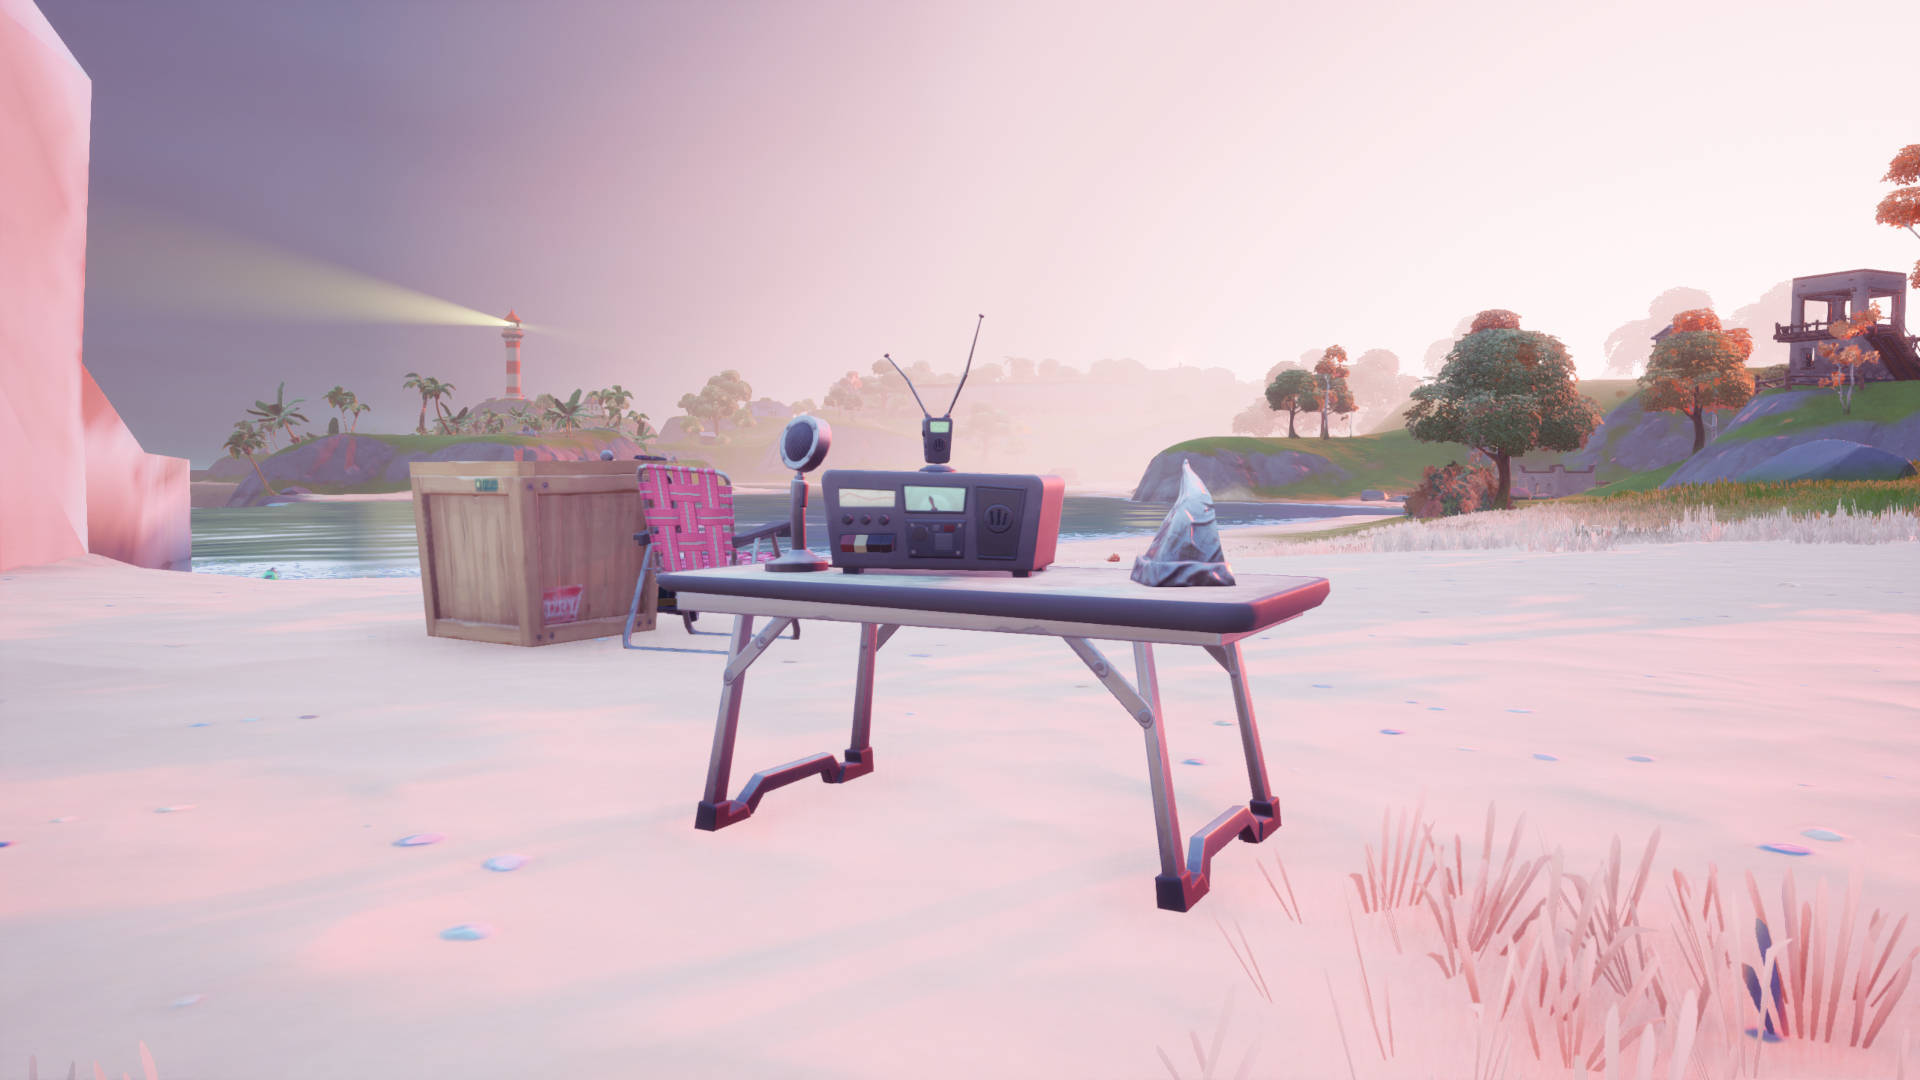 Where to interact with CB radios in Fortnite | PCGamesN